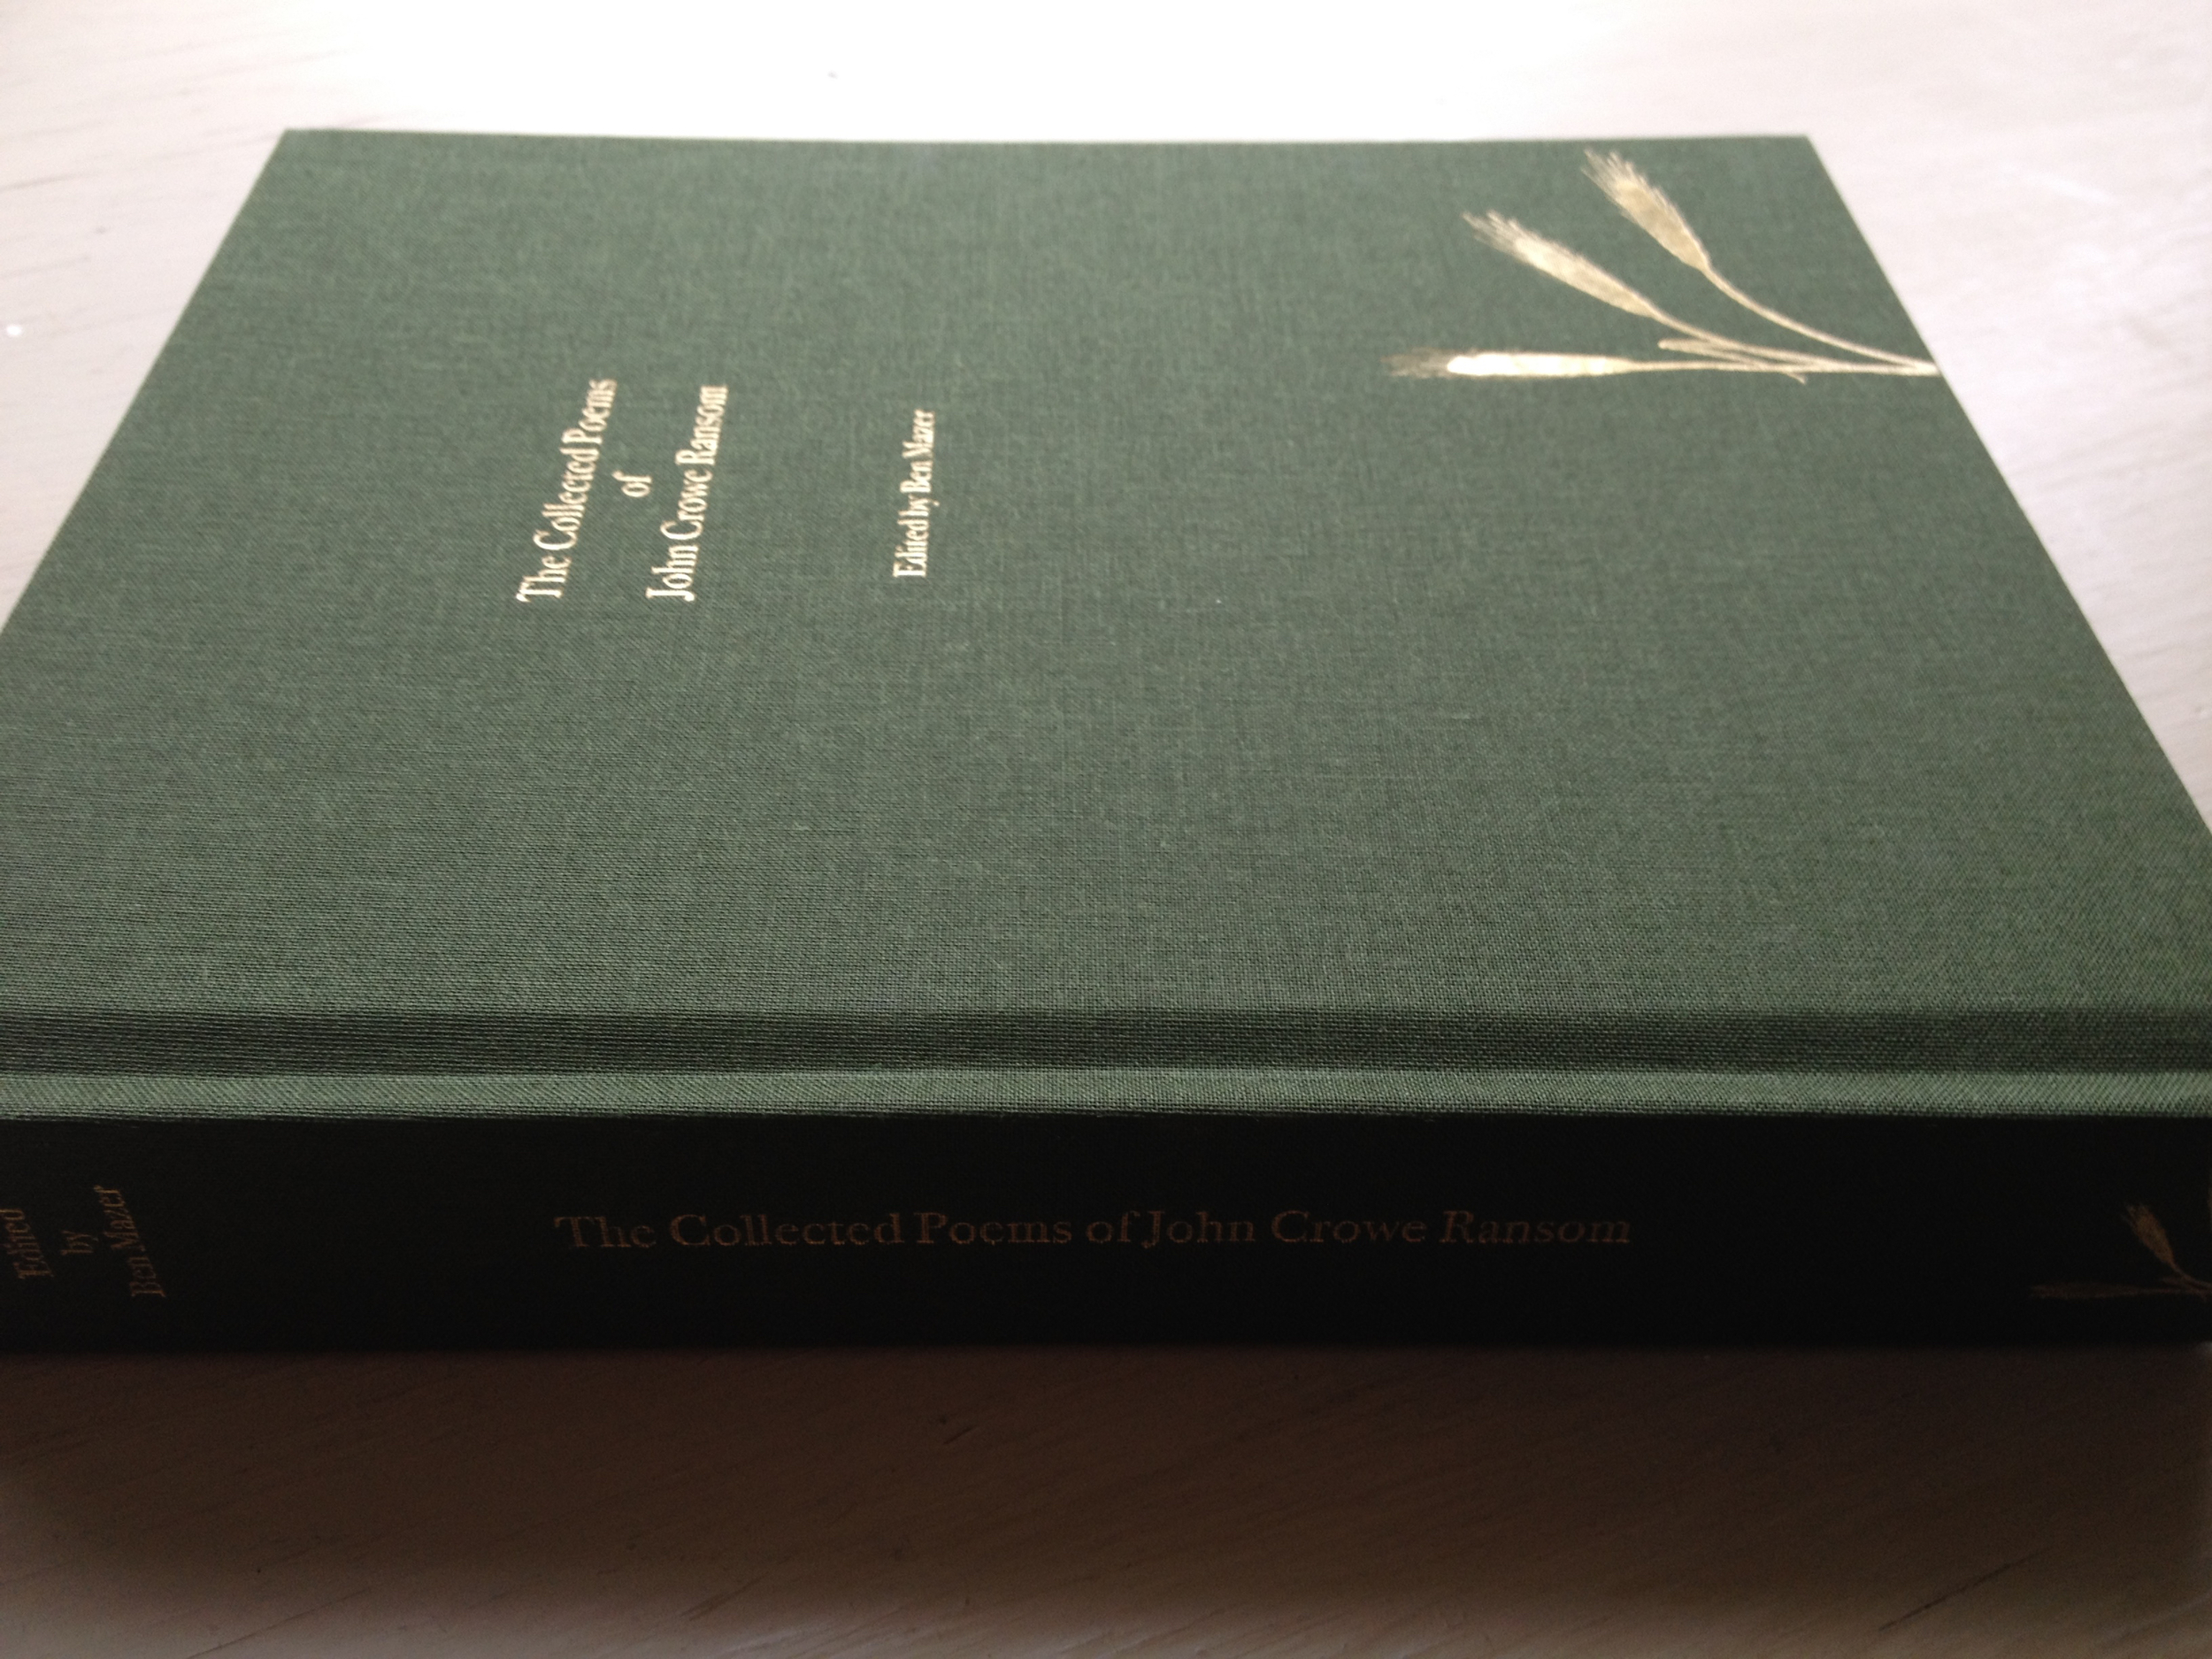 The Collected John Crowe Ransom - 17048.jpg